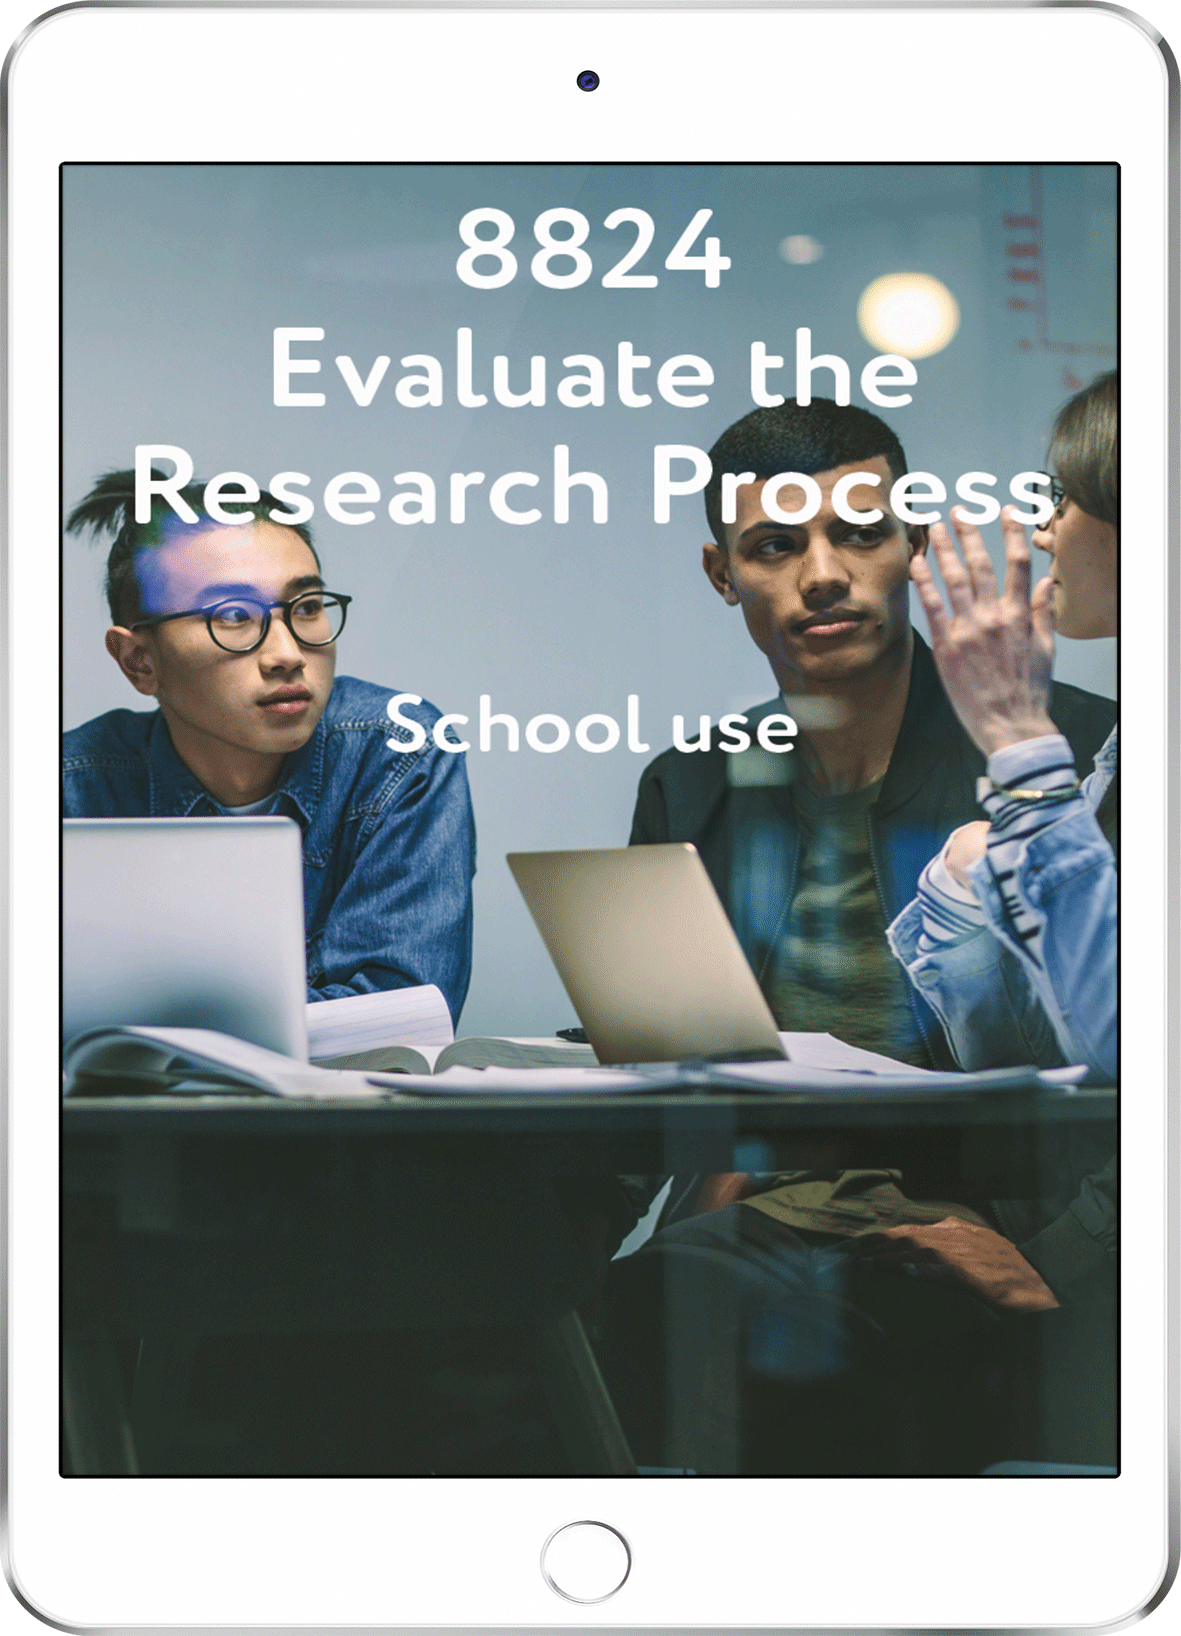 8824 v7 Evaluate the Research Process - School Use